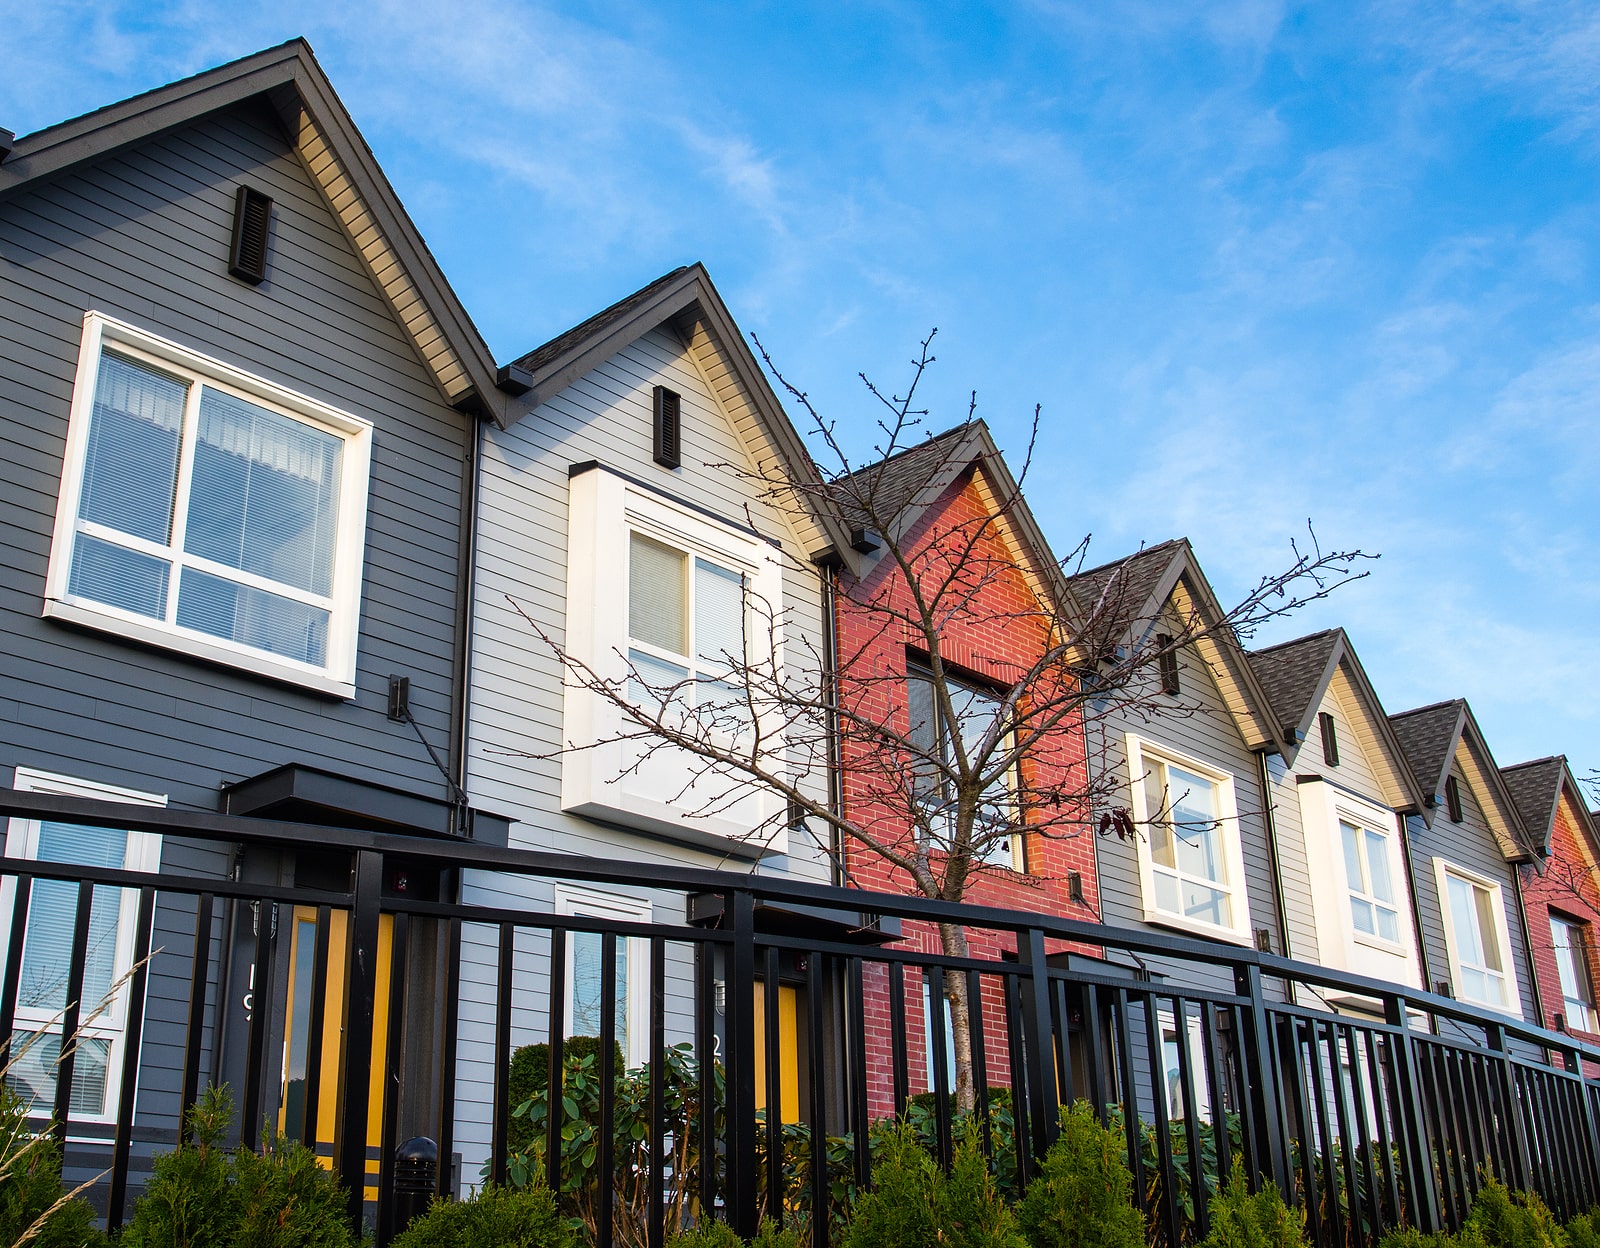 3 Key Things to Know About Section 8 Housing